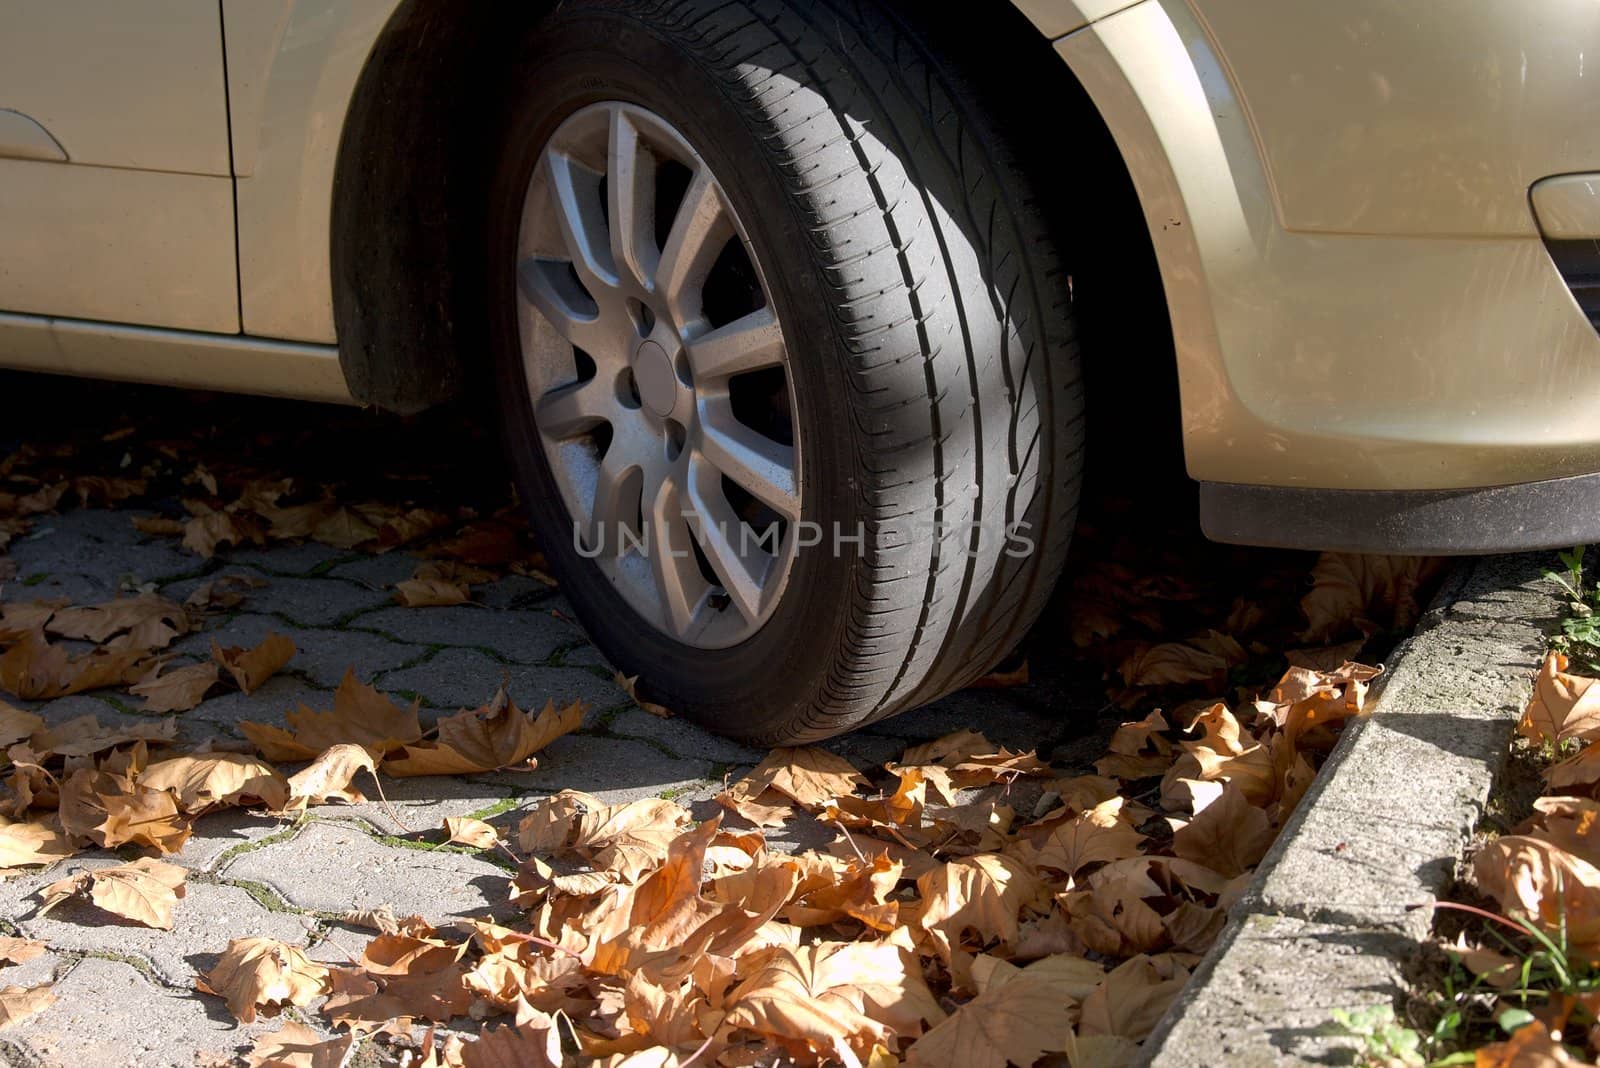 Wheel of a parking car surrounded by fallen leaves